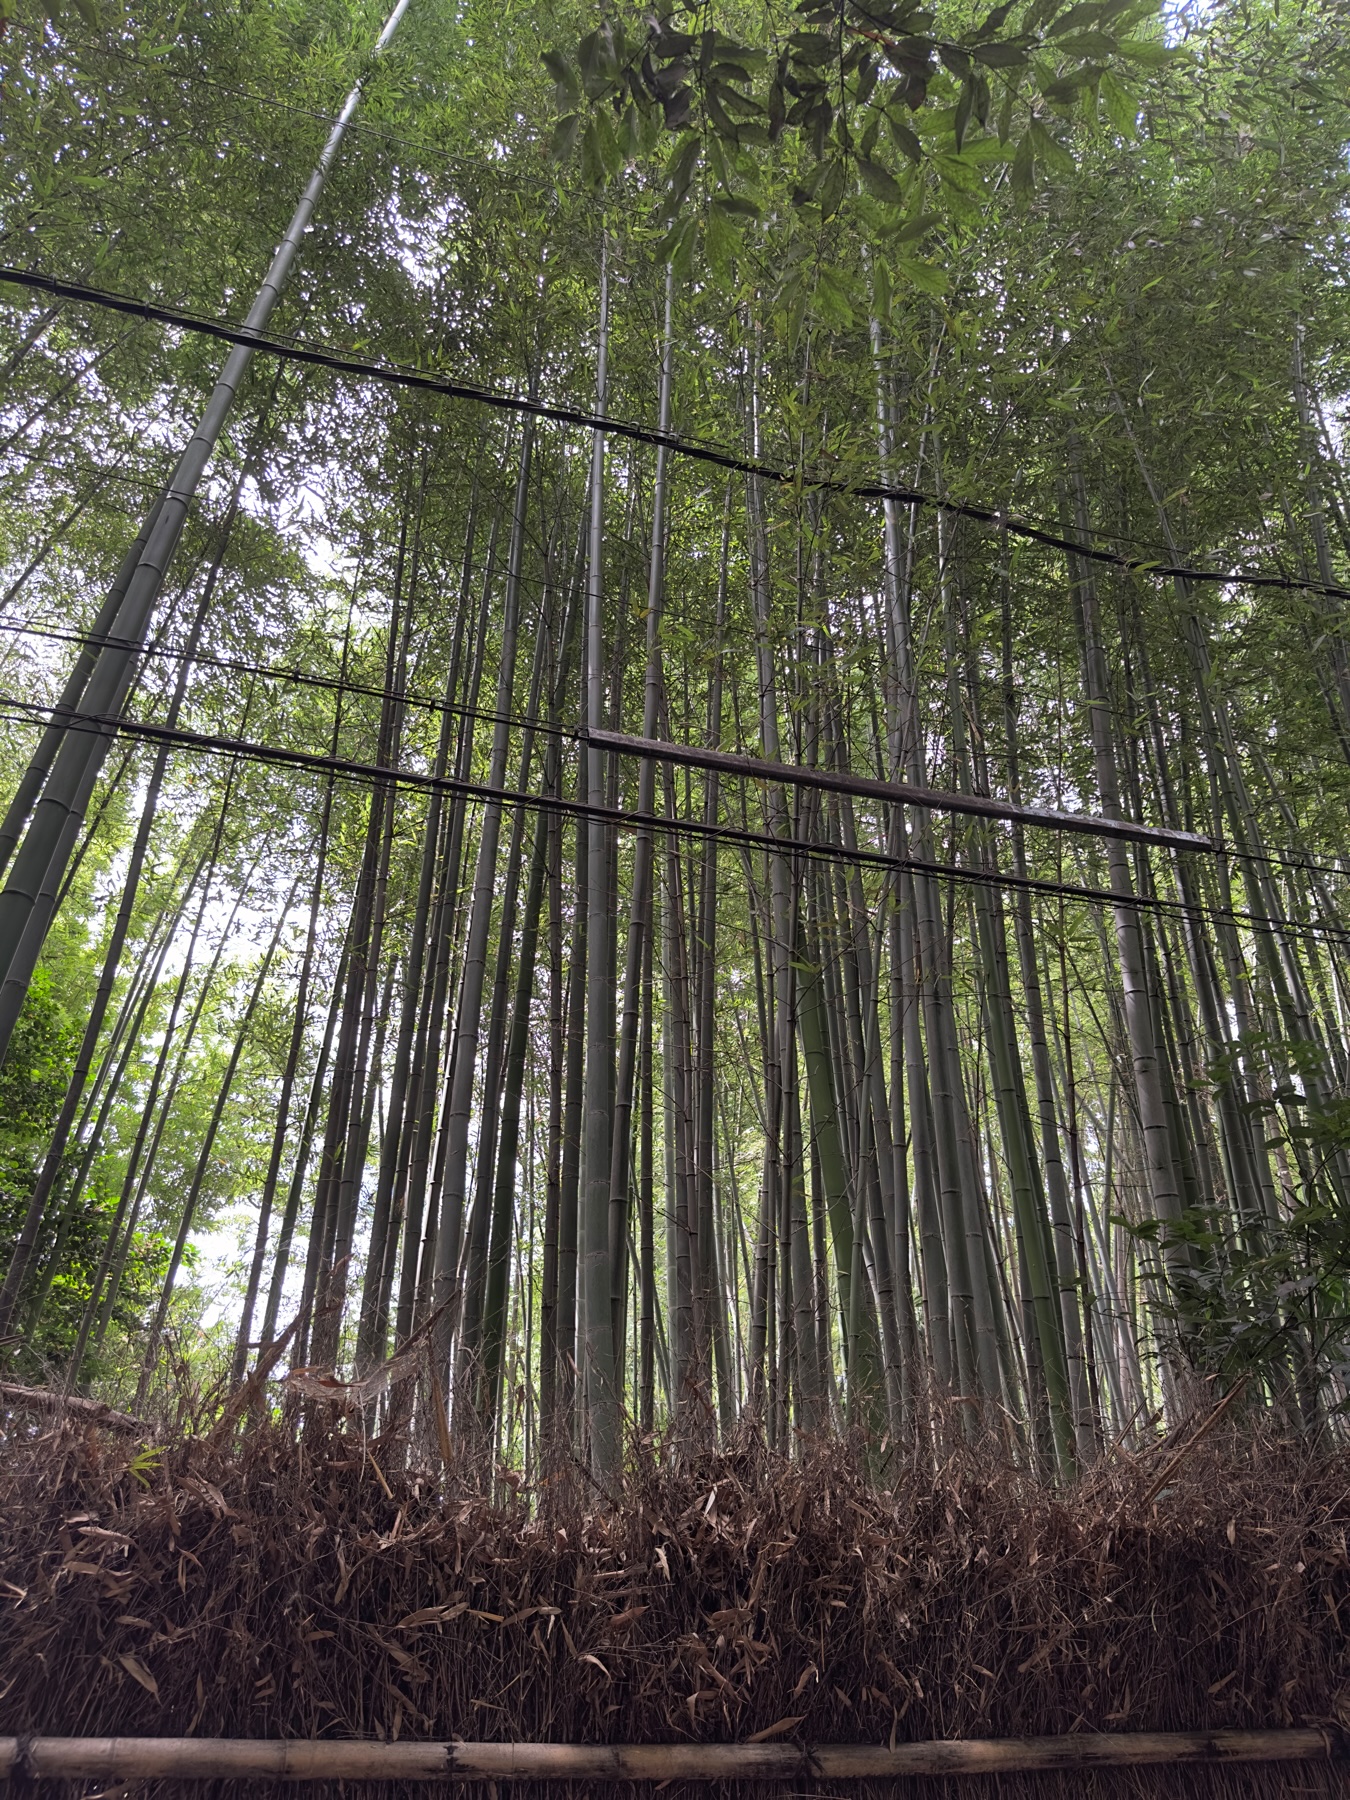 A view into the bamboo forest